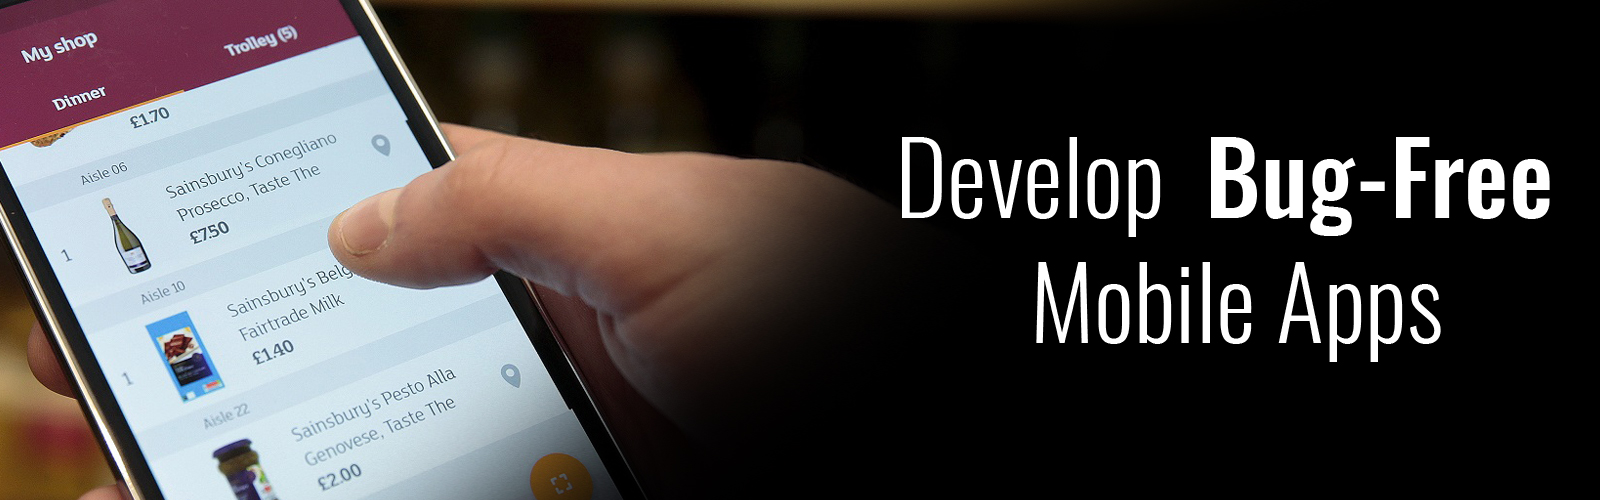 develop bug-free mobile applications